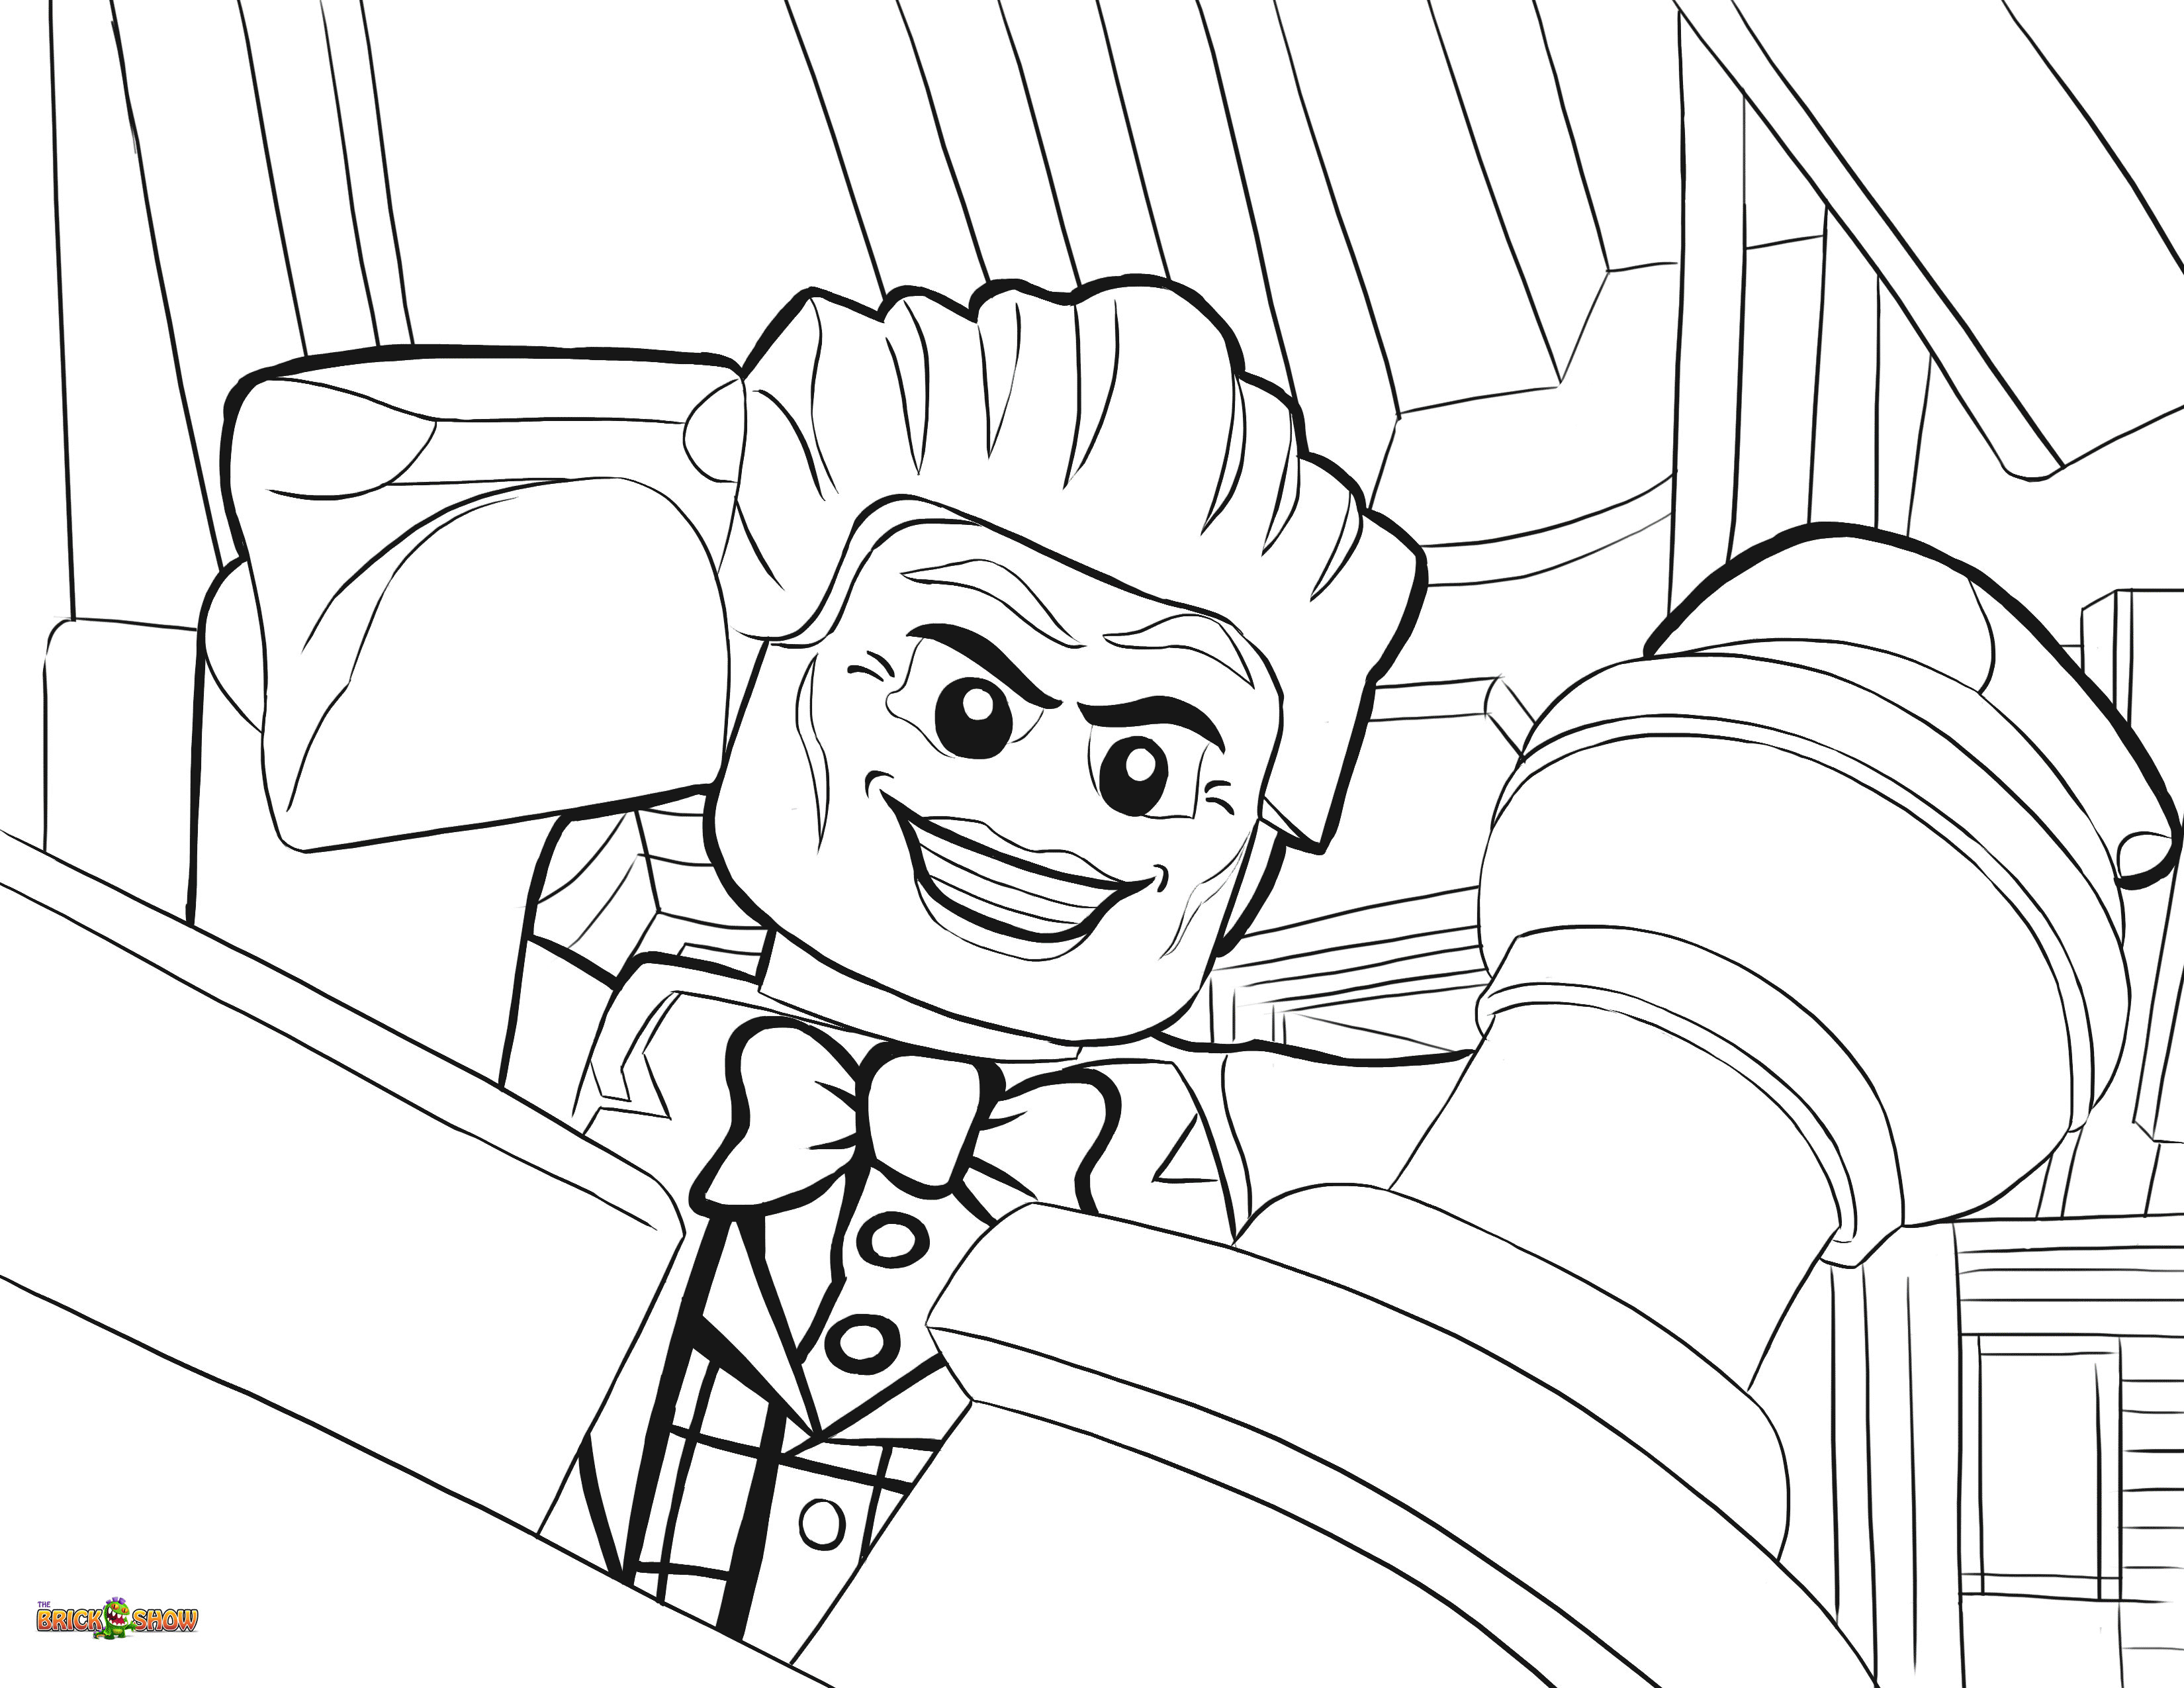 LEGO DC Universe Super Heroes Coloring Pages : Free Printable LEGO